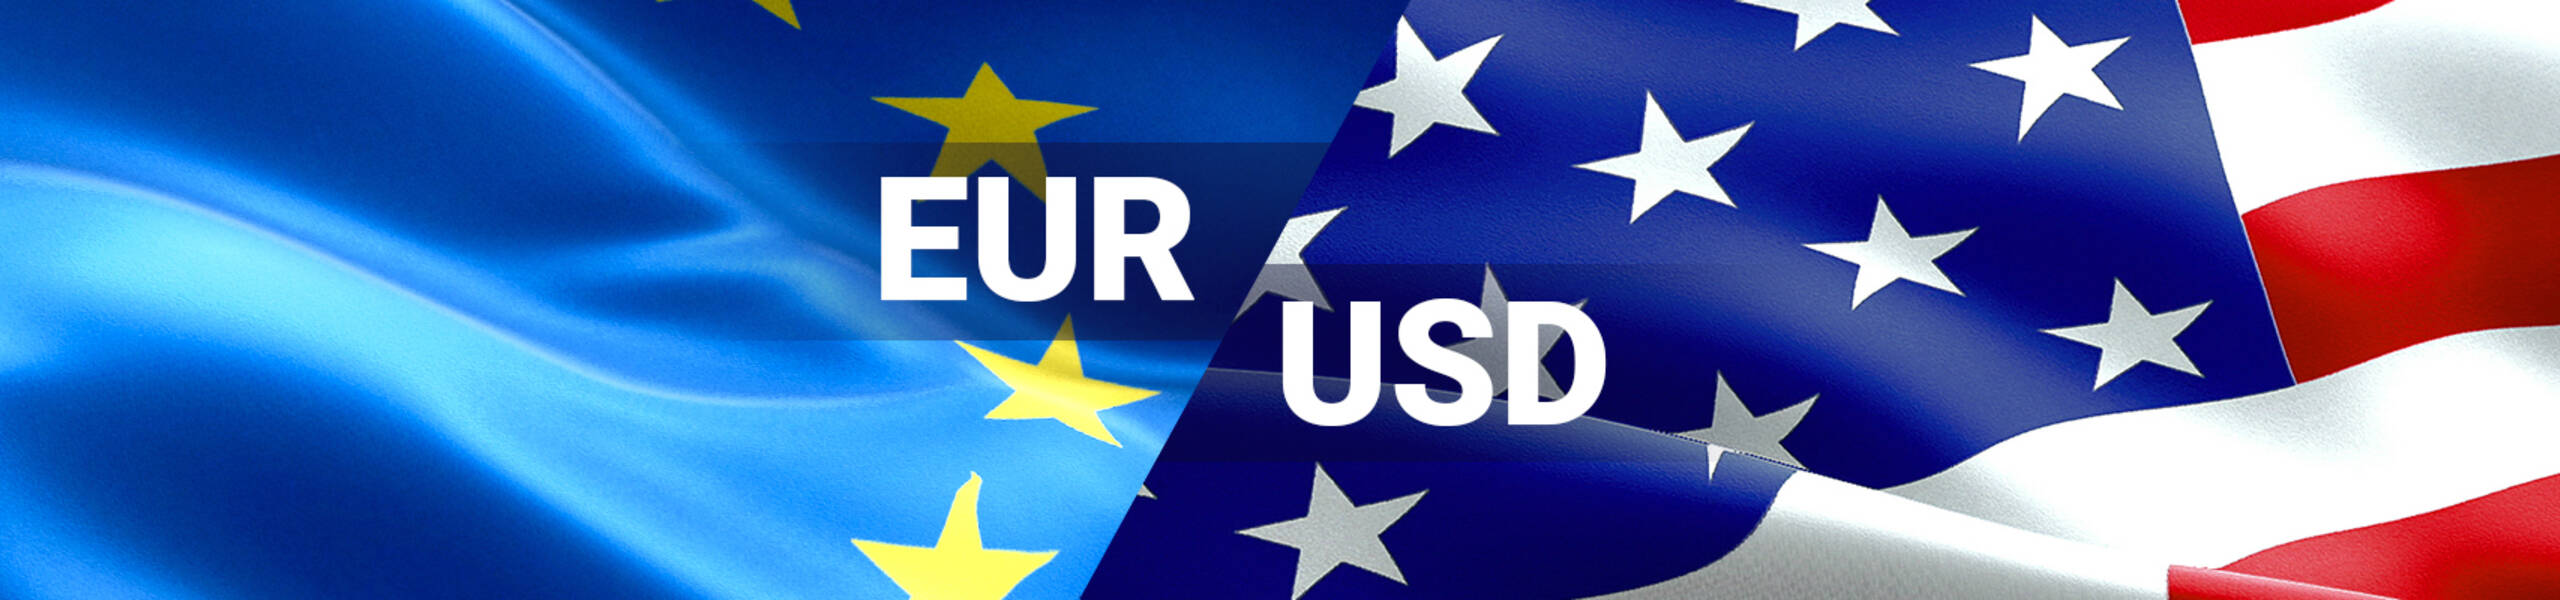 EUR/USD: euro wants to go higher